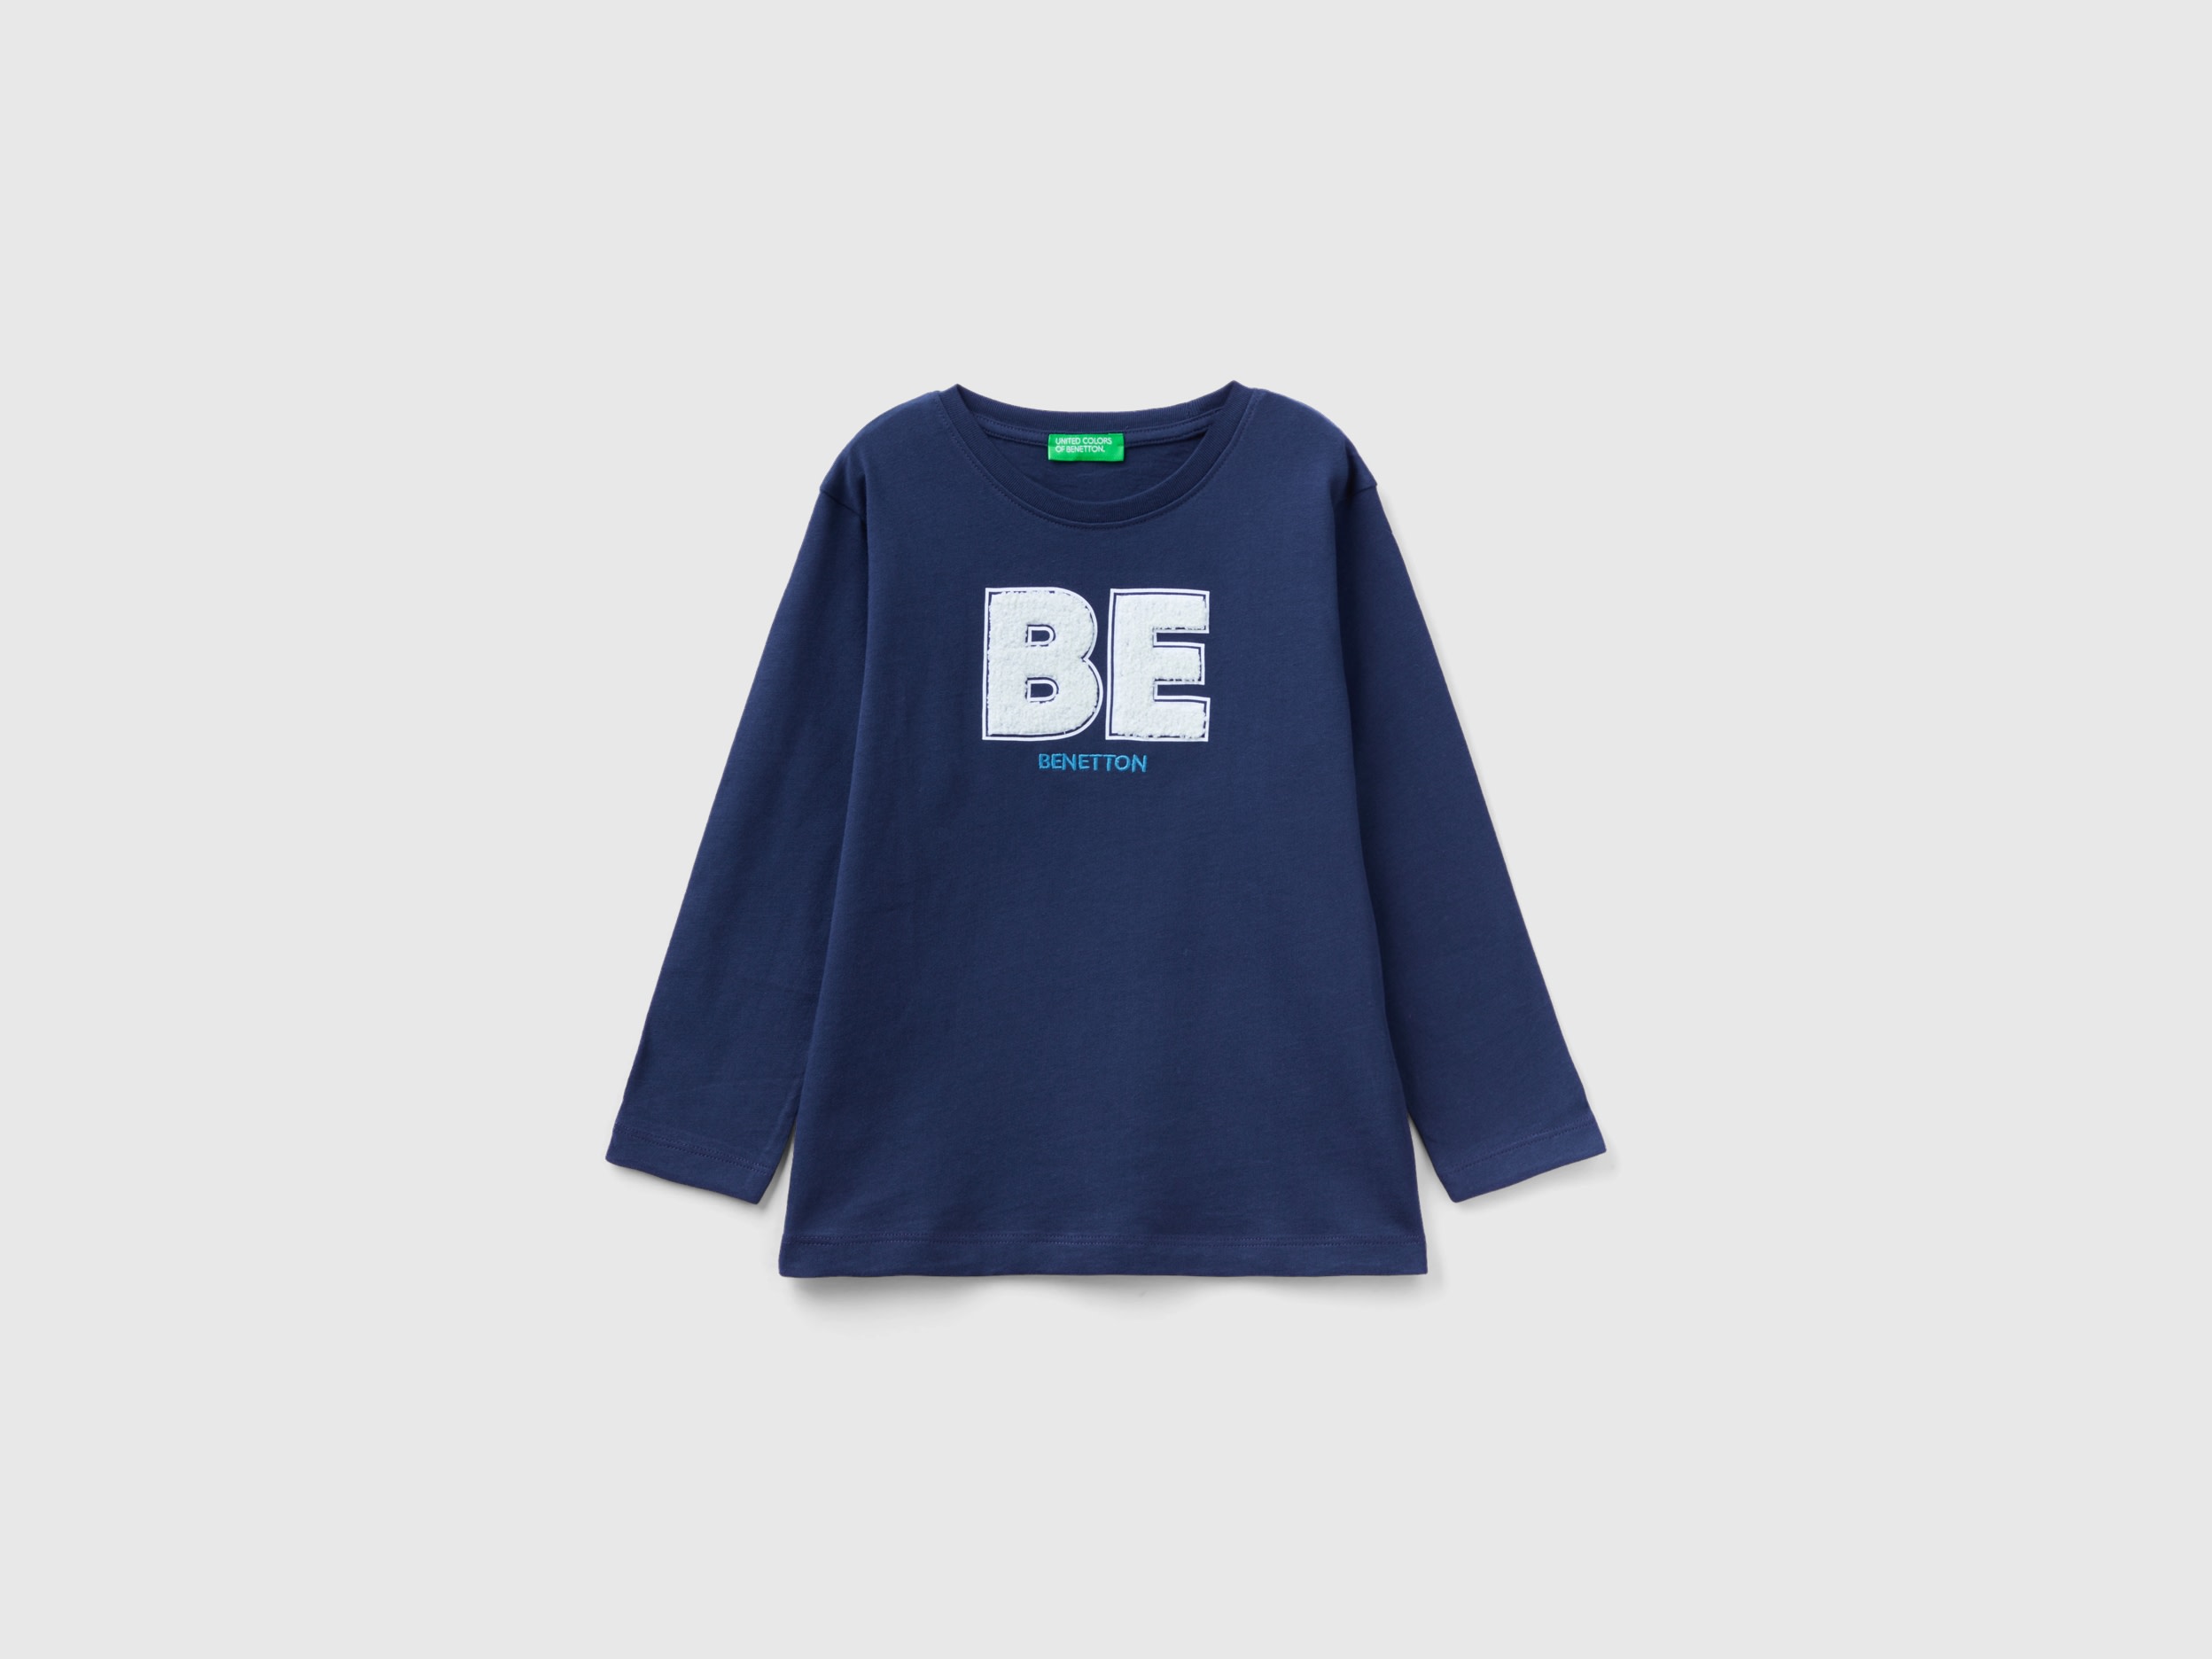 Benetton, T-shirt With Terry Embroidery, size 5-6, Dark Blue, Kids